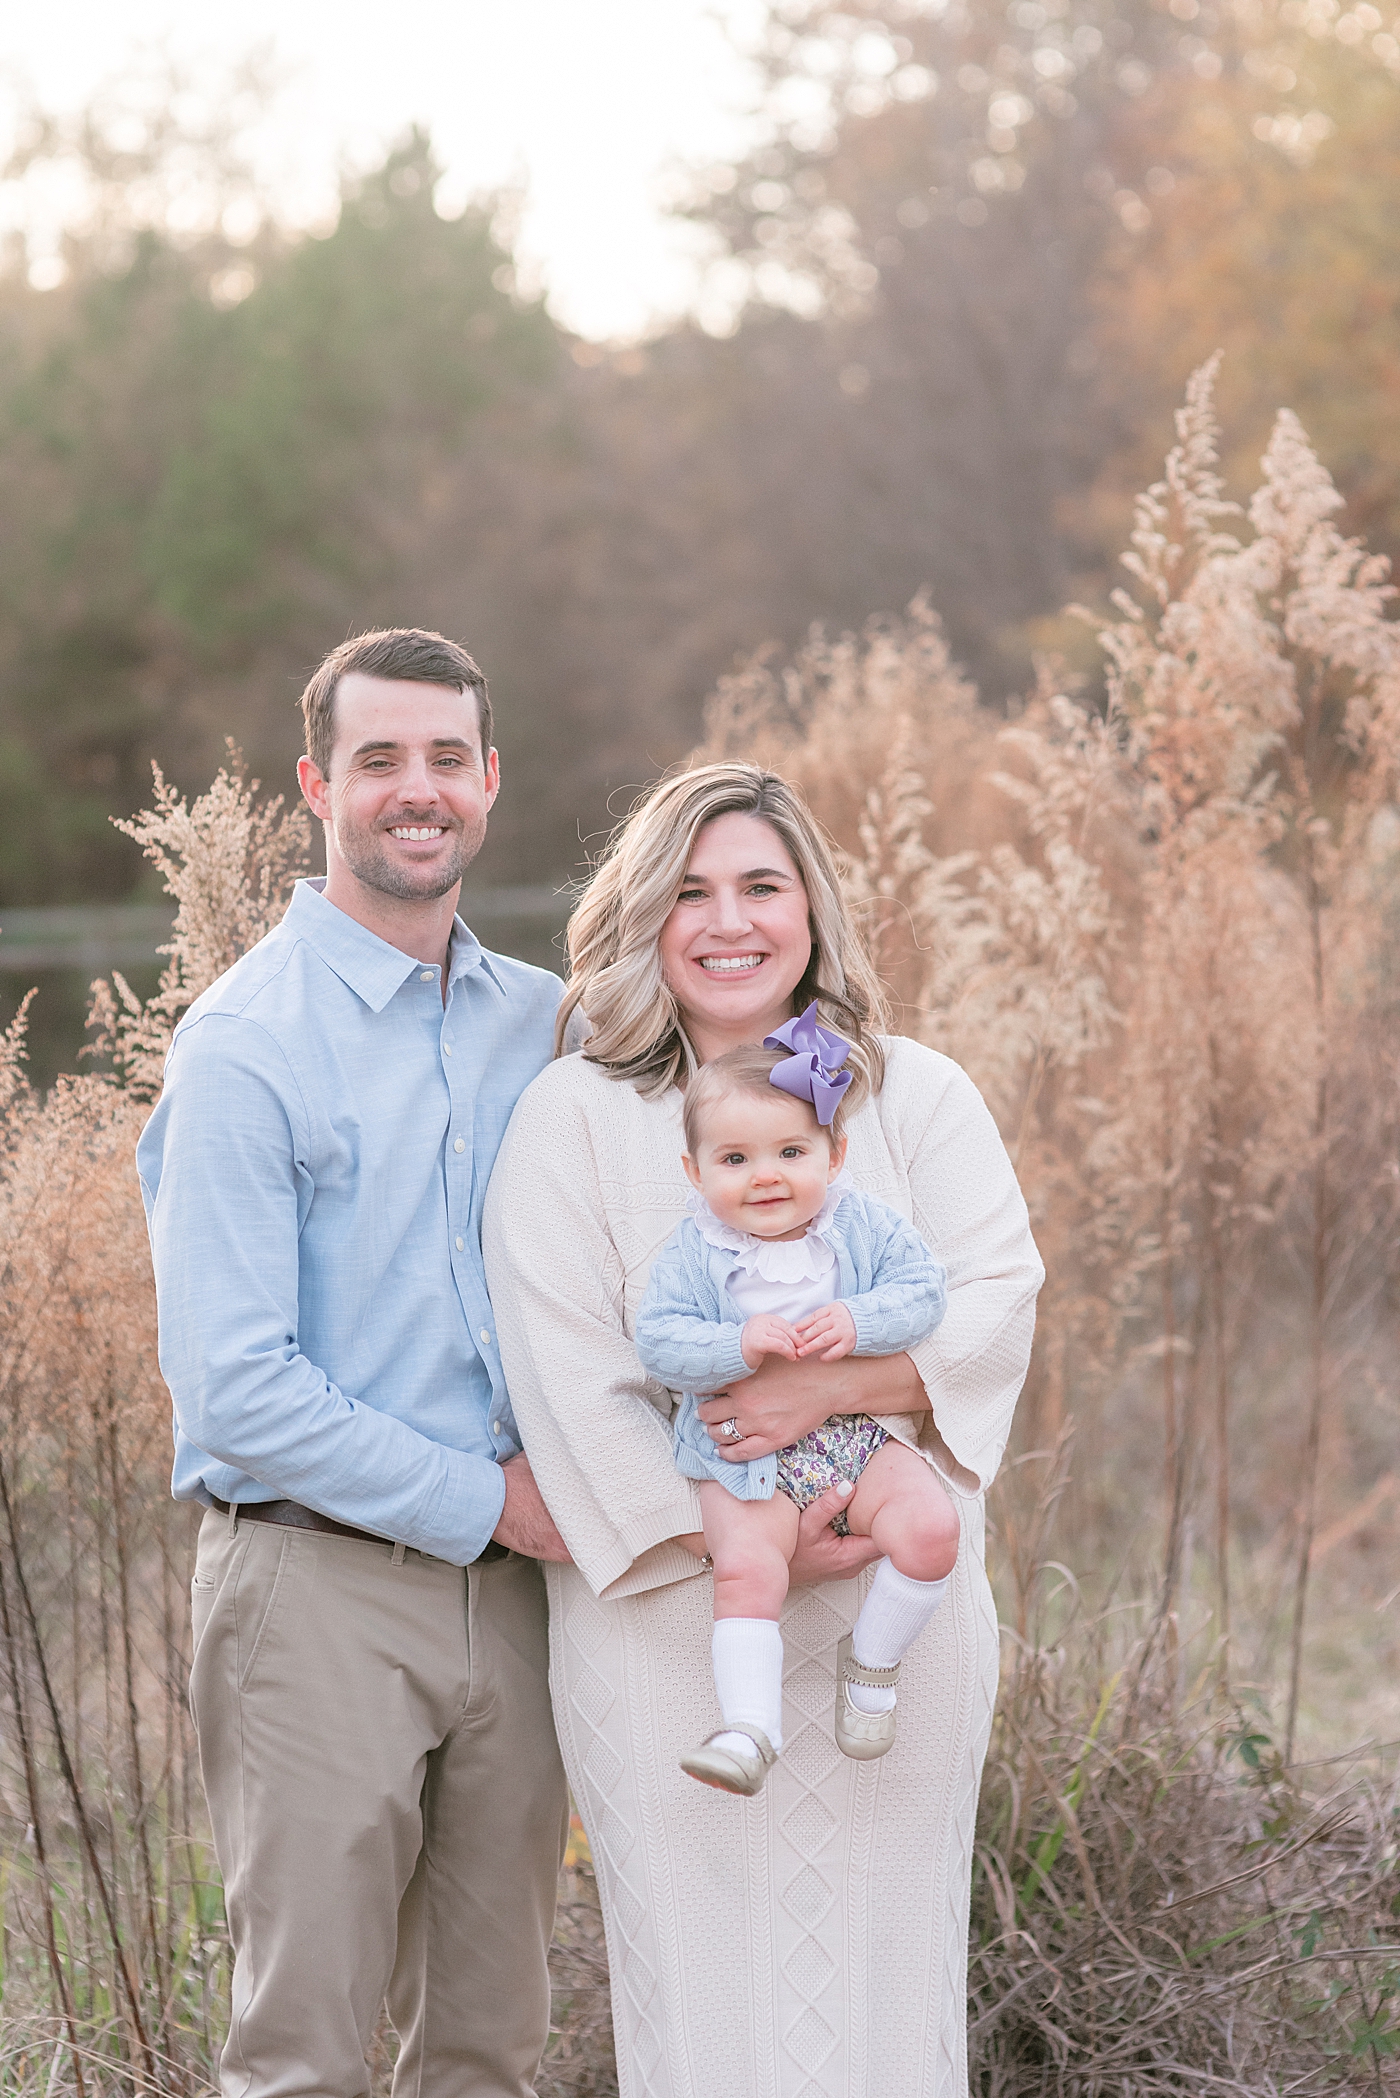 Mom and dad with their baby girl during her Milestone Session in Charlotte | Photo by Anna Wisjo Photography 